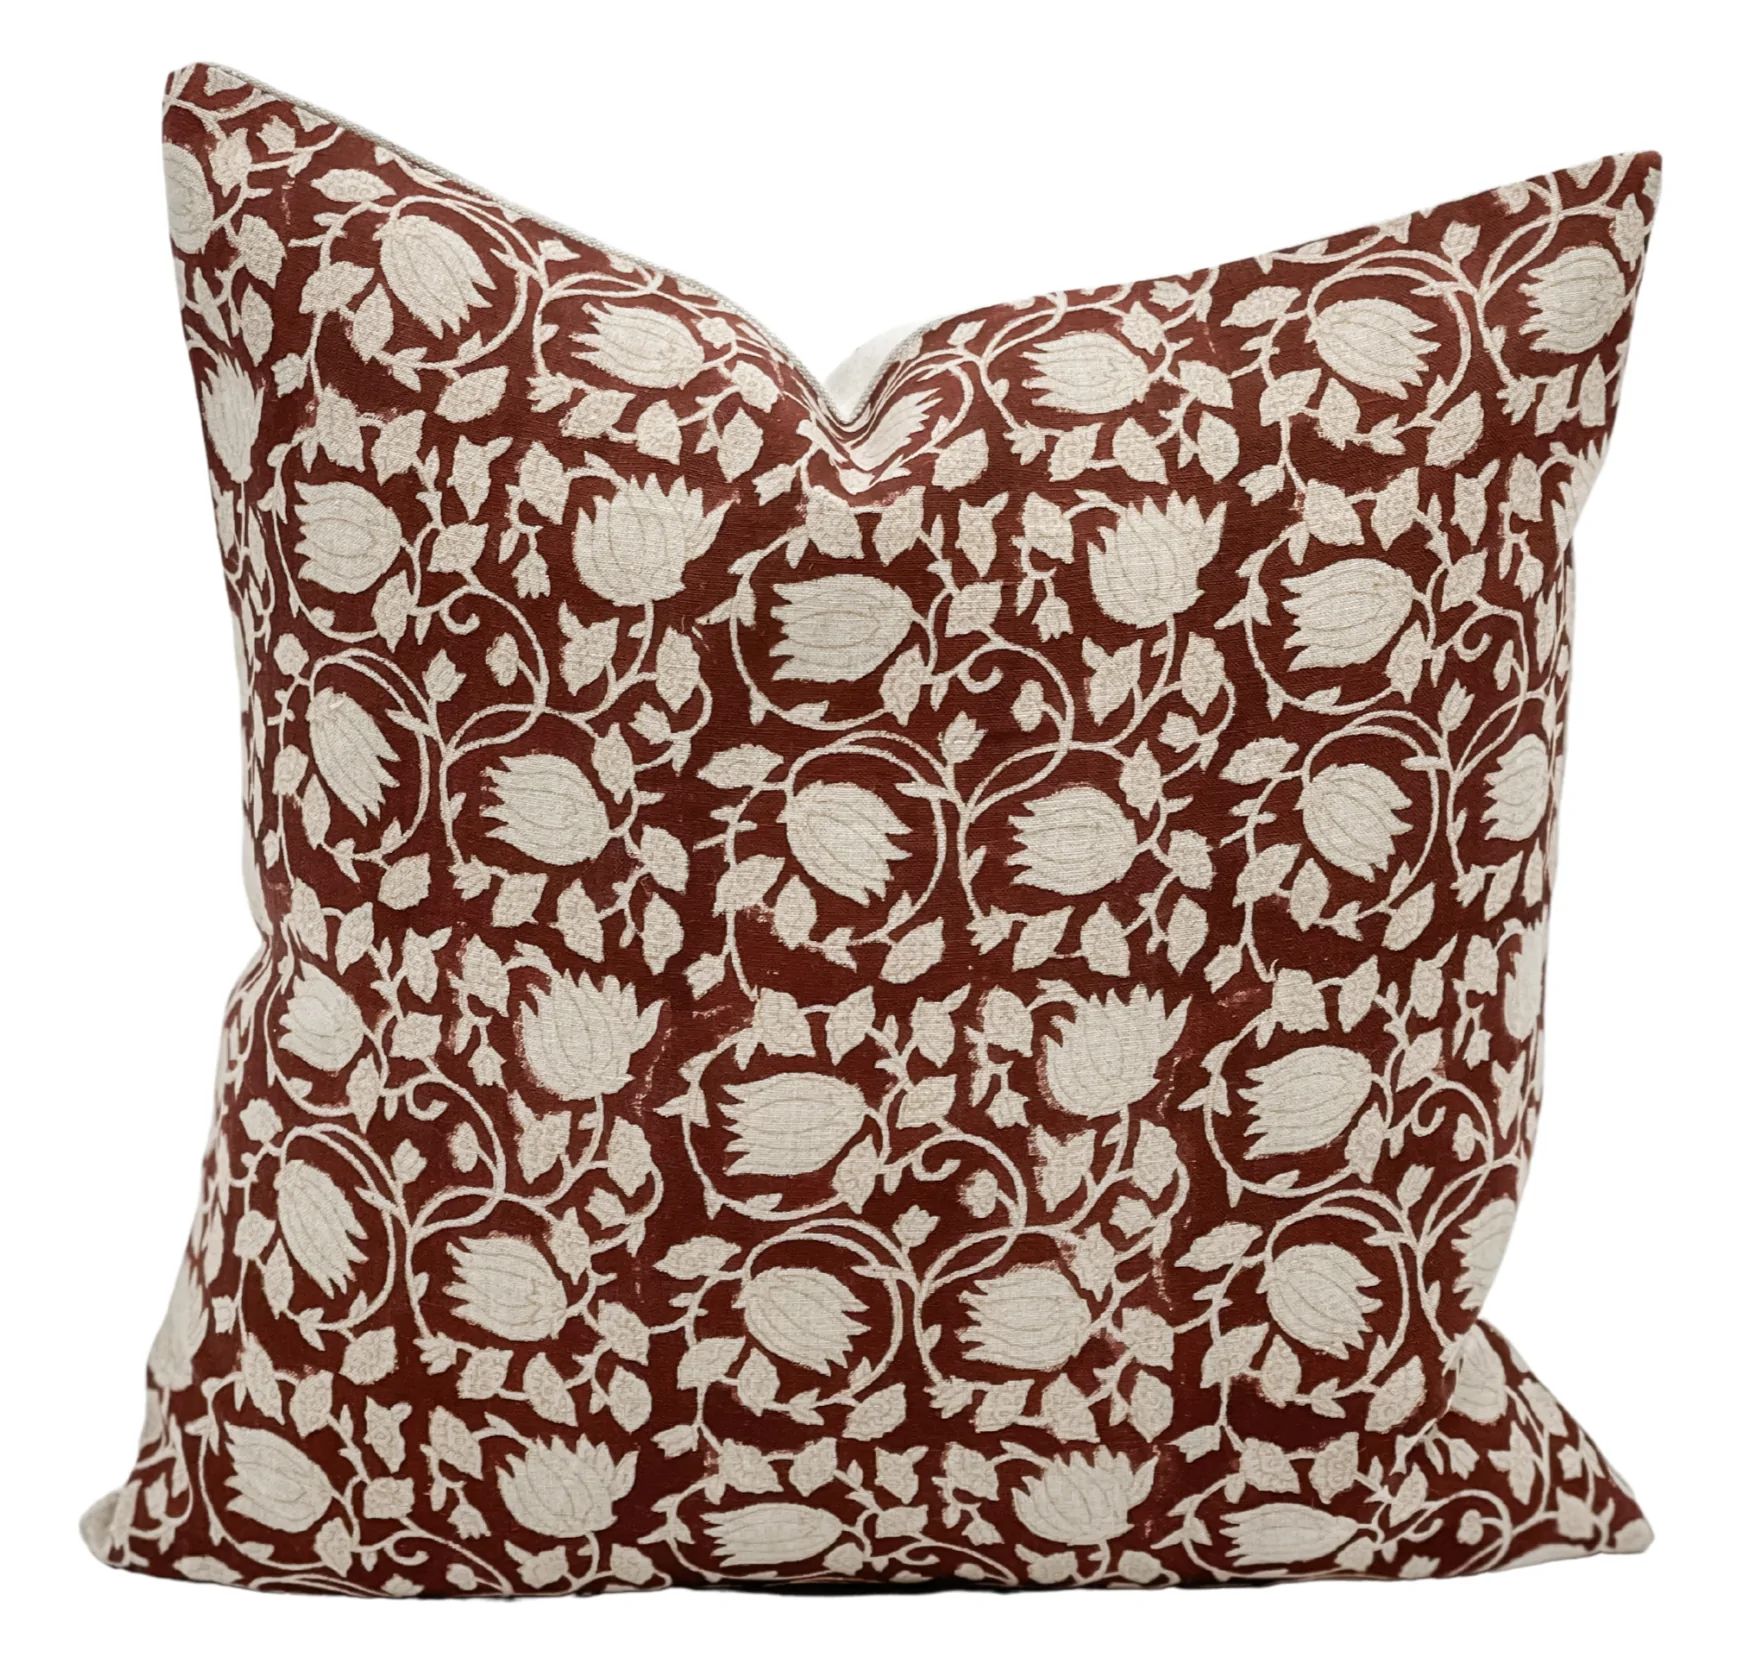 ALINA IN BURGUNGY PILLOW COVER | Krinto